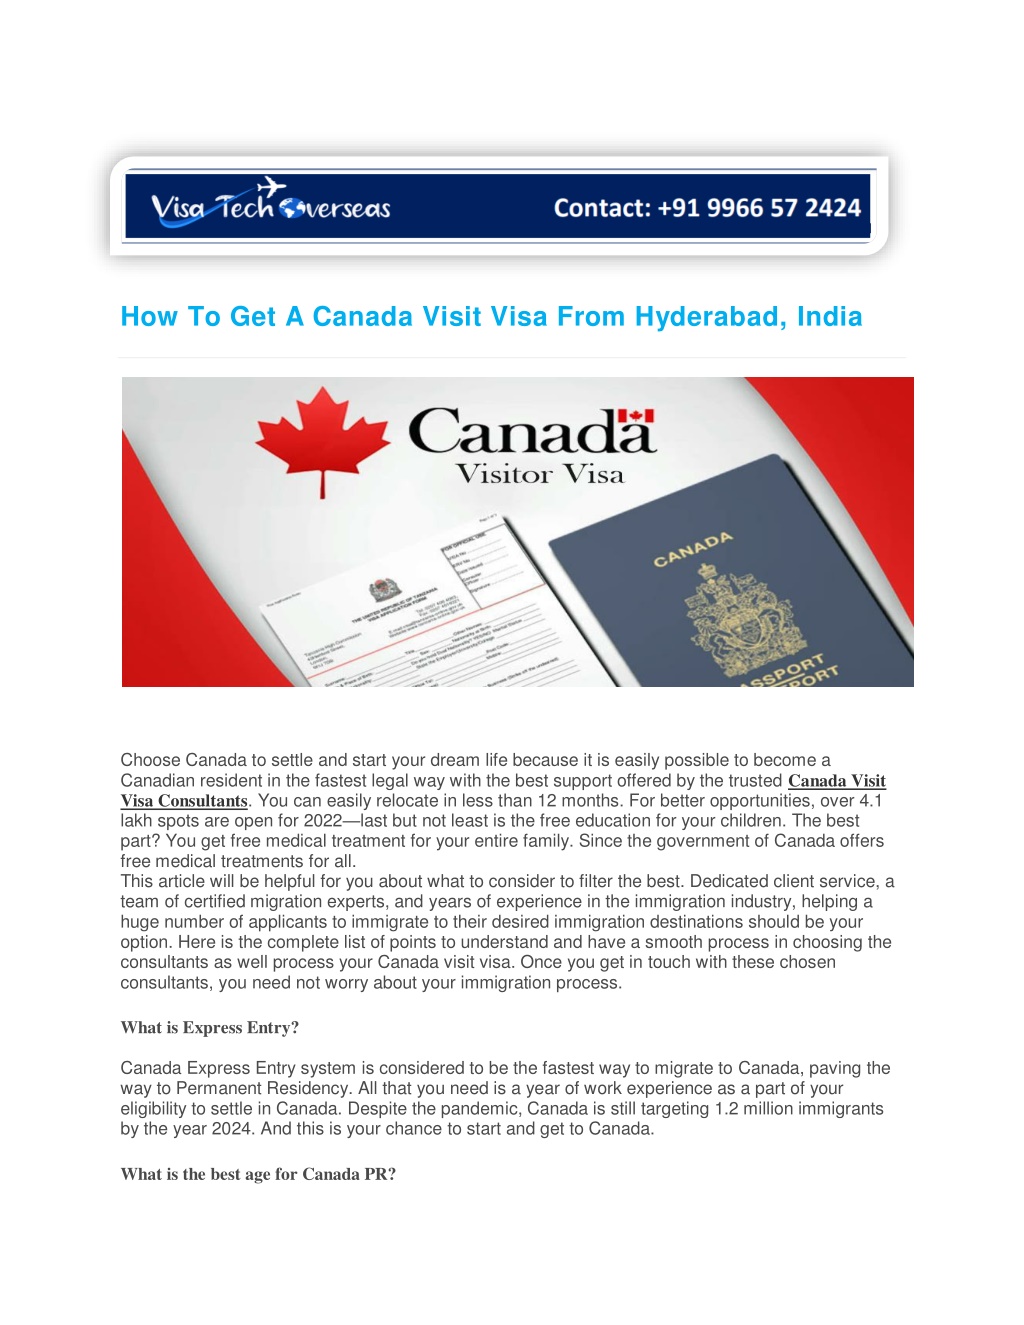 how to get a canada visit visa from hyderabad l.w